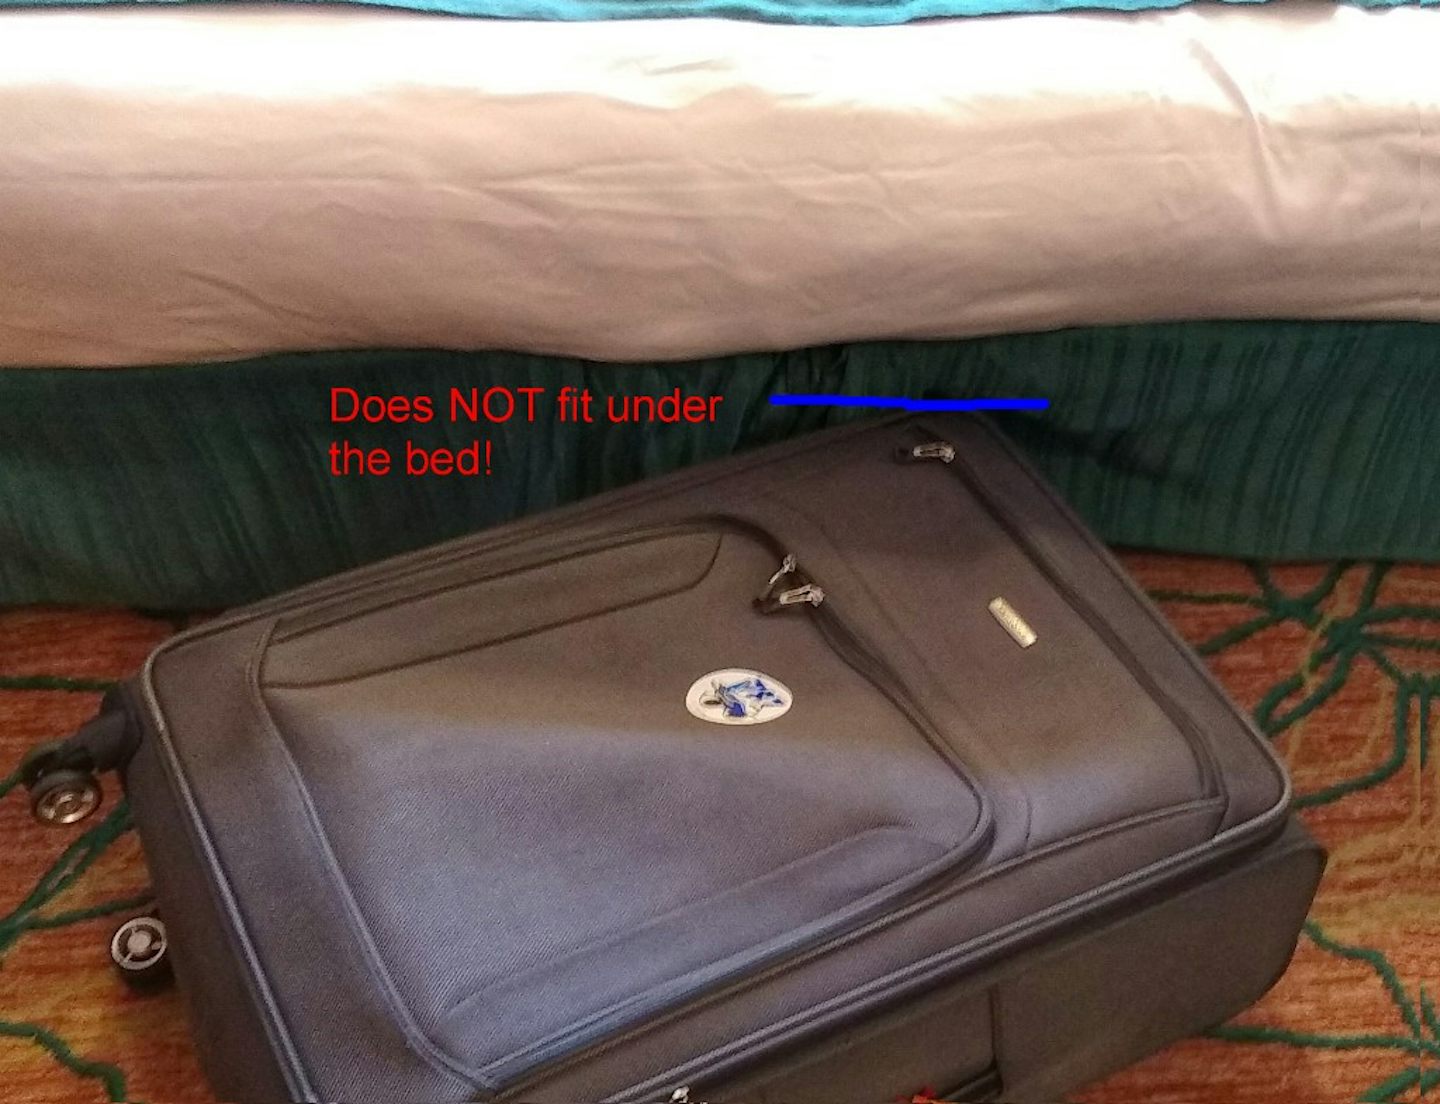 Suitcase will not slide under the bed, which is actually two cots pushed to